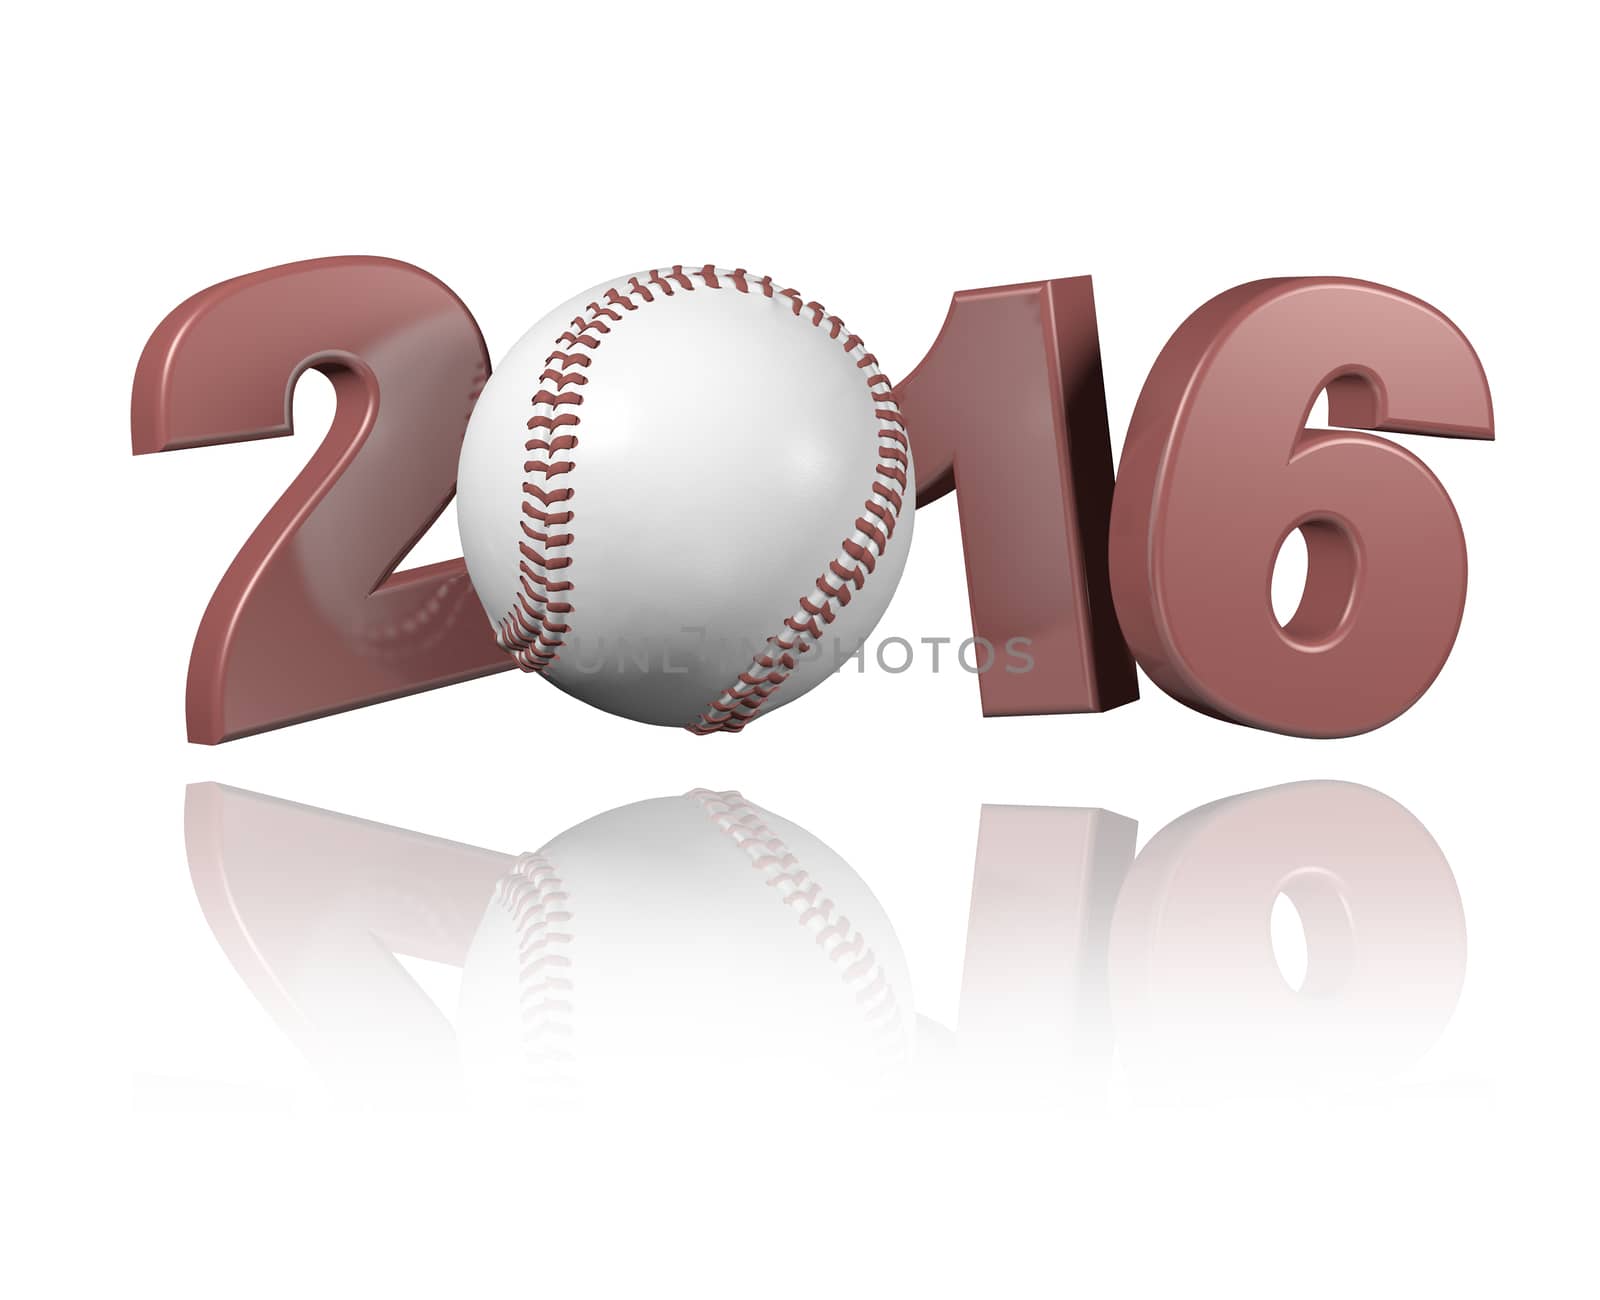 Baseball 2016 design with a white Background